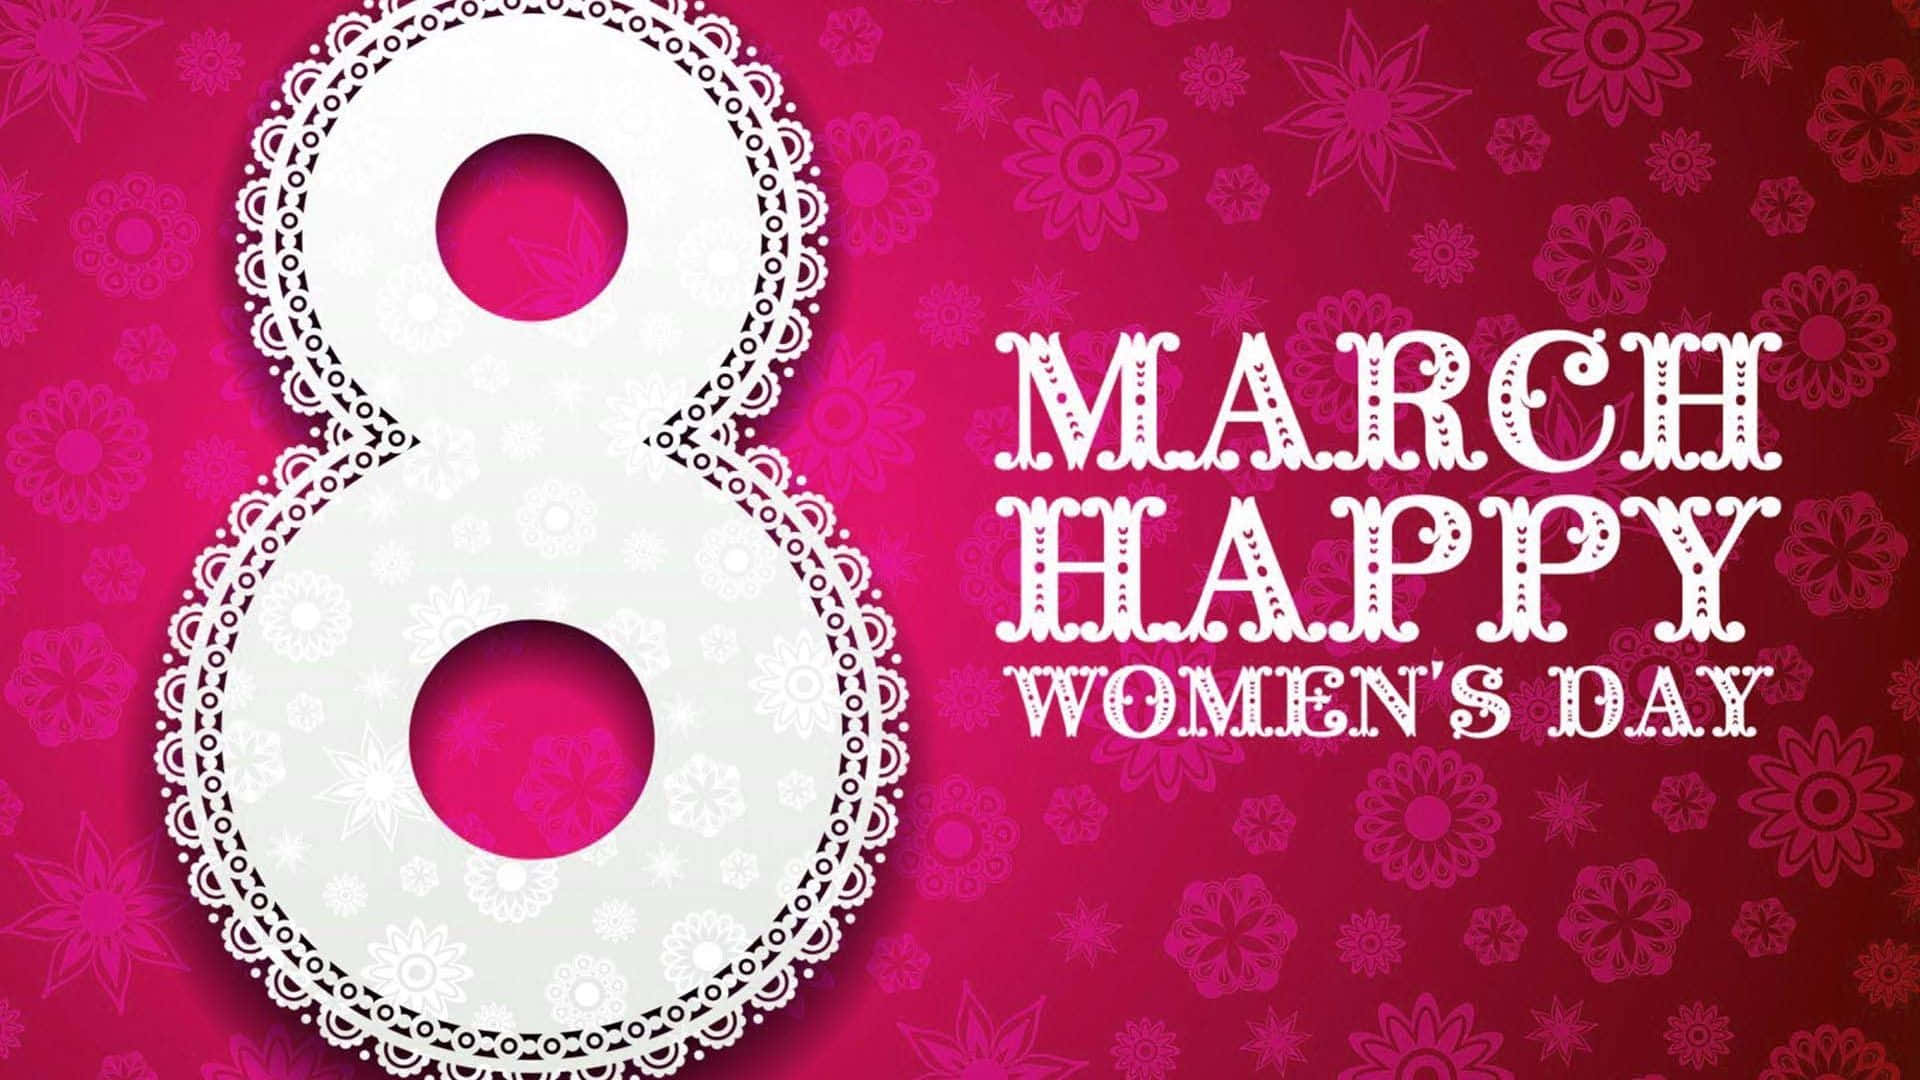 New Energy Happy Womens Day Wallpaper